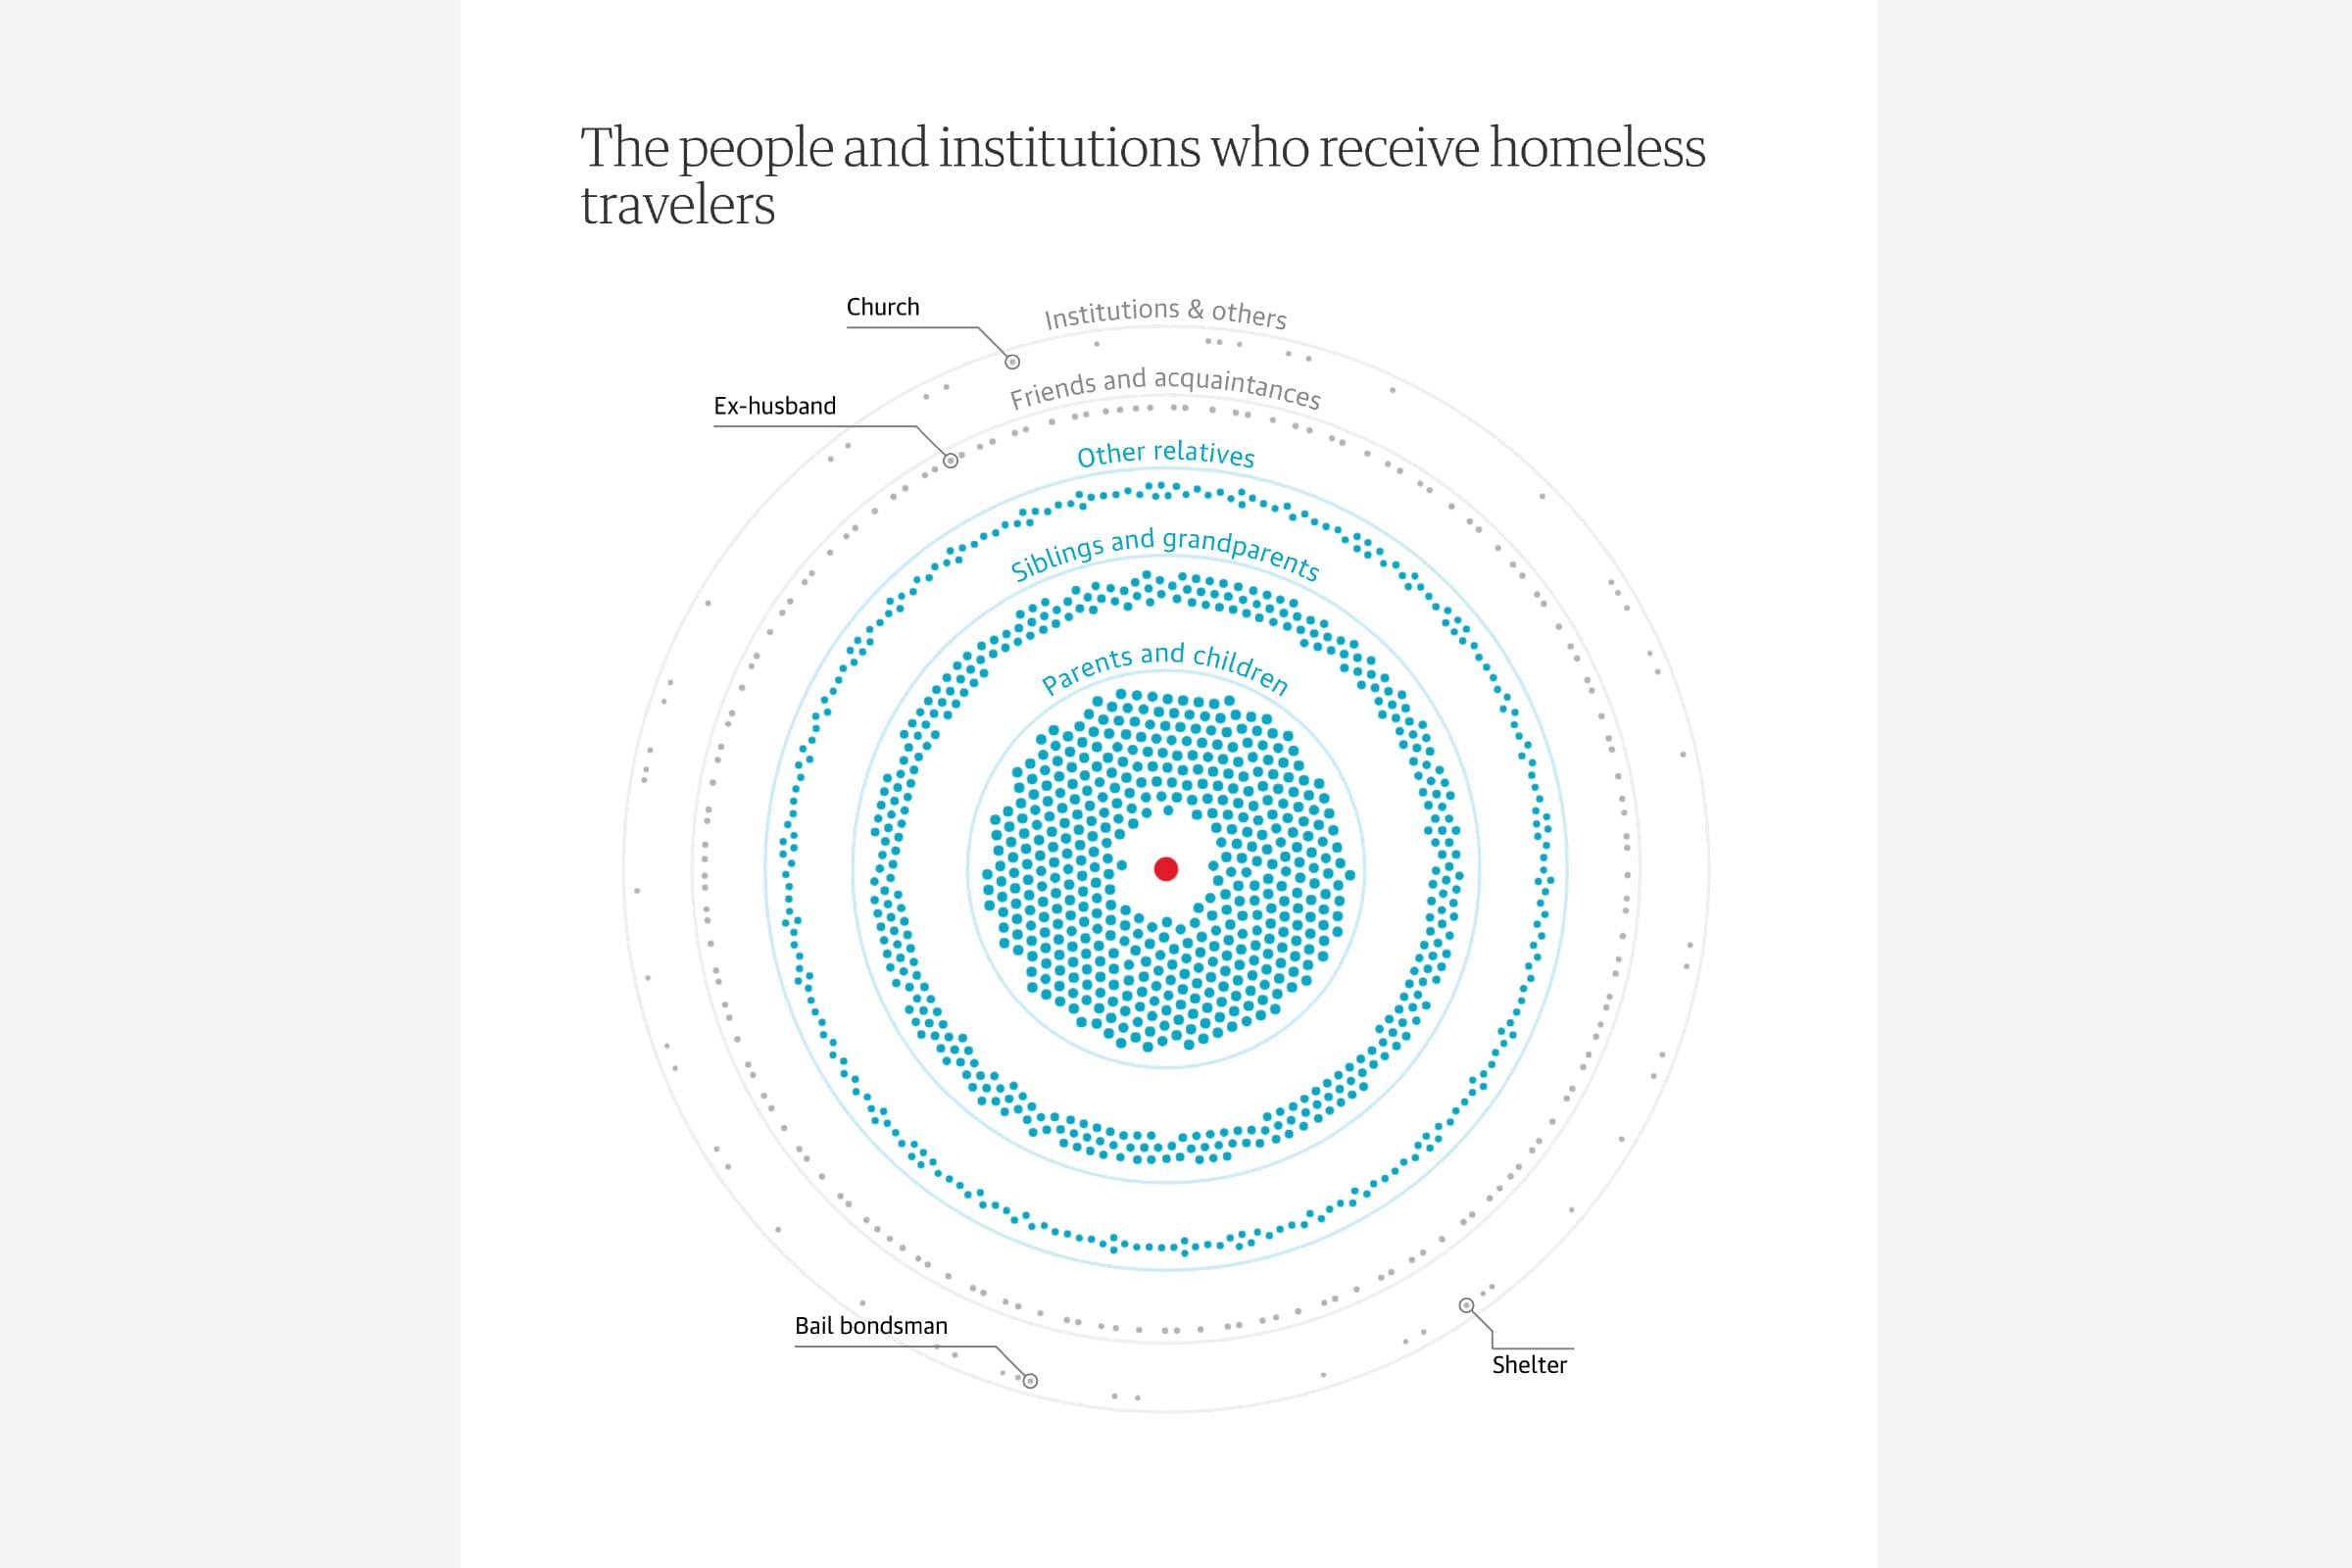 A visualization showing where the homeless go to